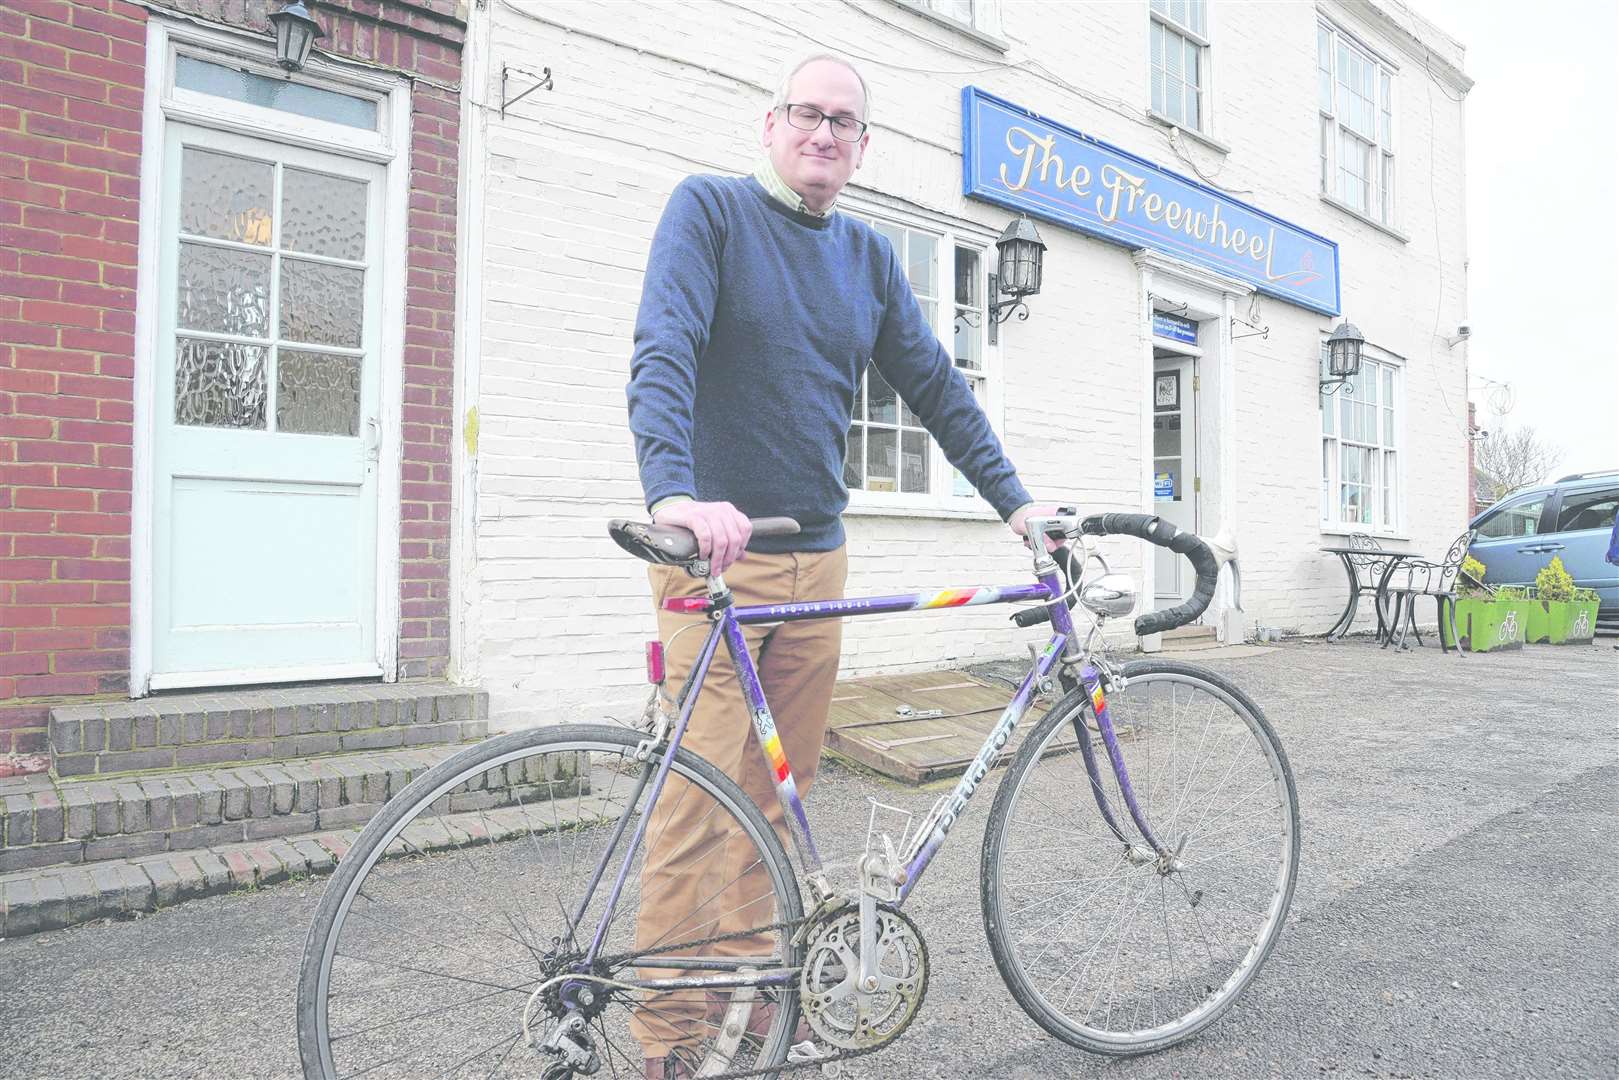 Adrian Oliver, Swale council's new officer for active travel, has teamed up with Sheerness town councillor Linda Brinklow